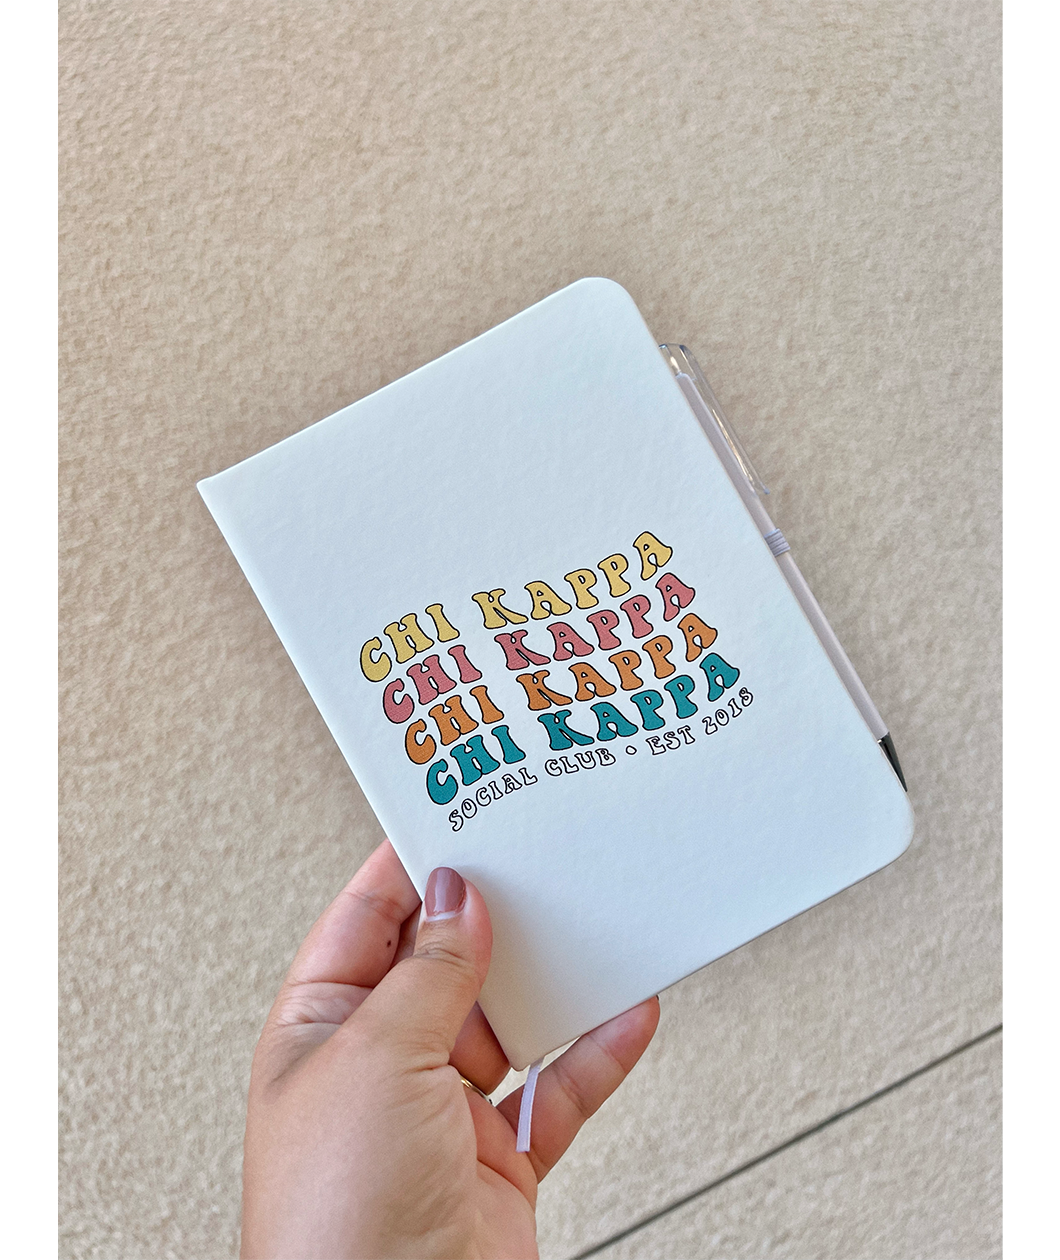 A white journal that has the words "Chi Kappa" written in four different colors on the front. Below that it says "Social Club Est. 2018". The journal is being held by a hand. From Sierra Schultzzie.